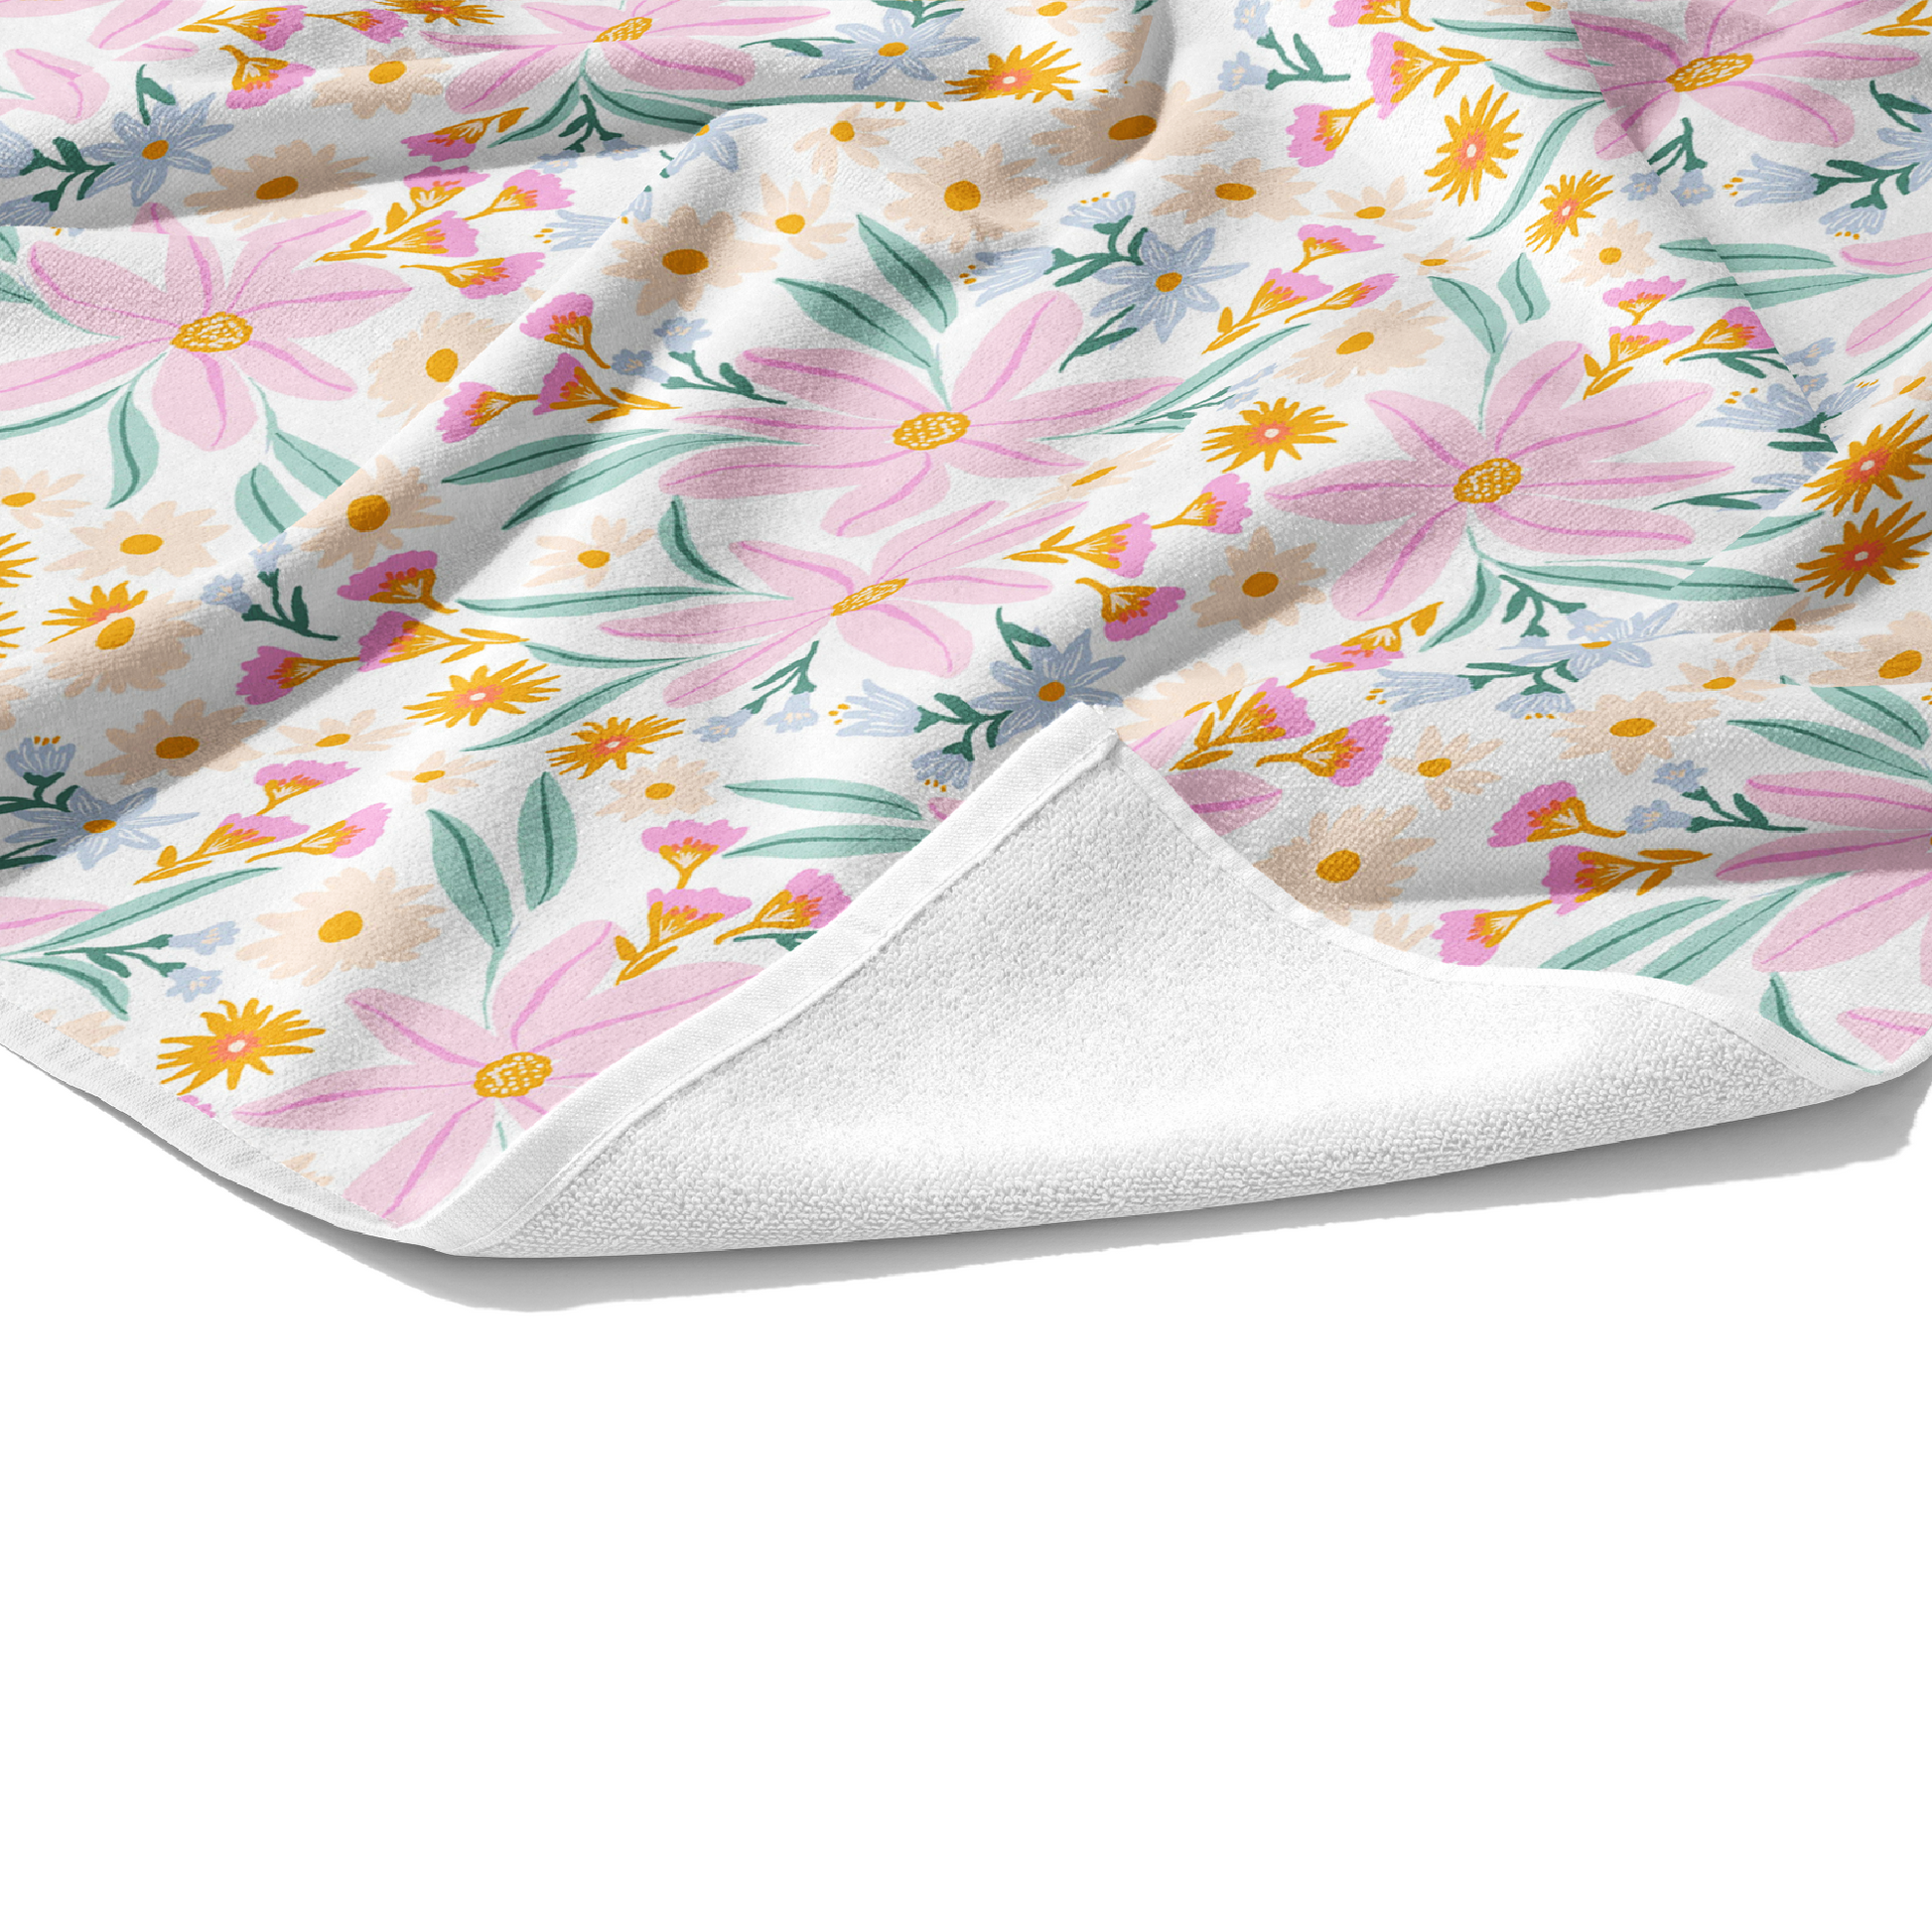 Plush white cotton personalized beach towel with light pink, golden yellow, cream, and powder blue wildflowers on front.